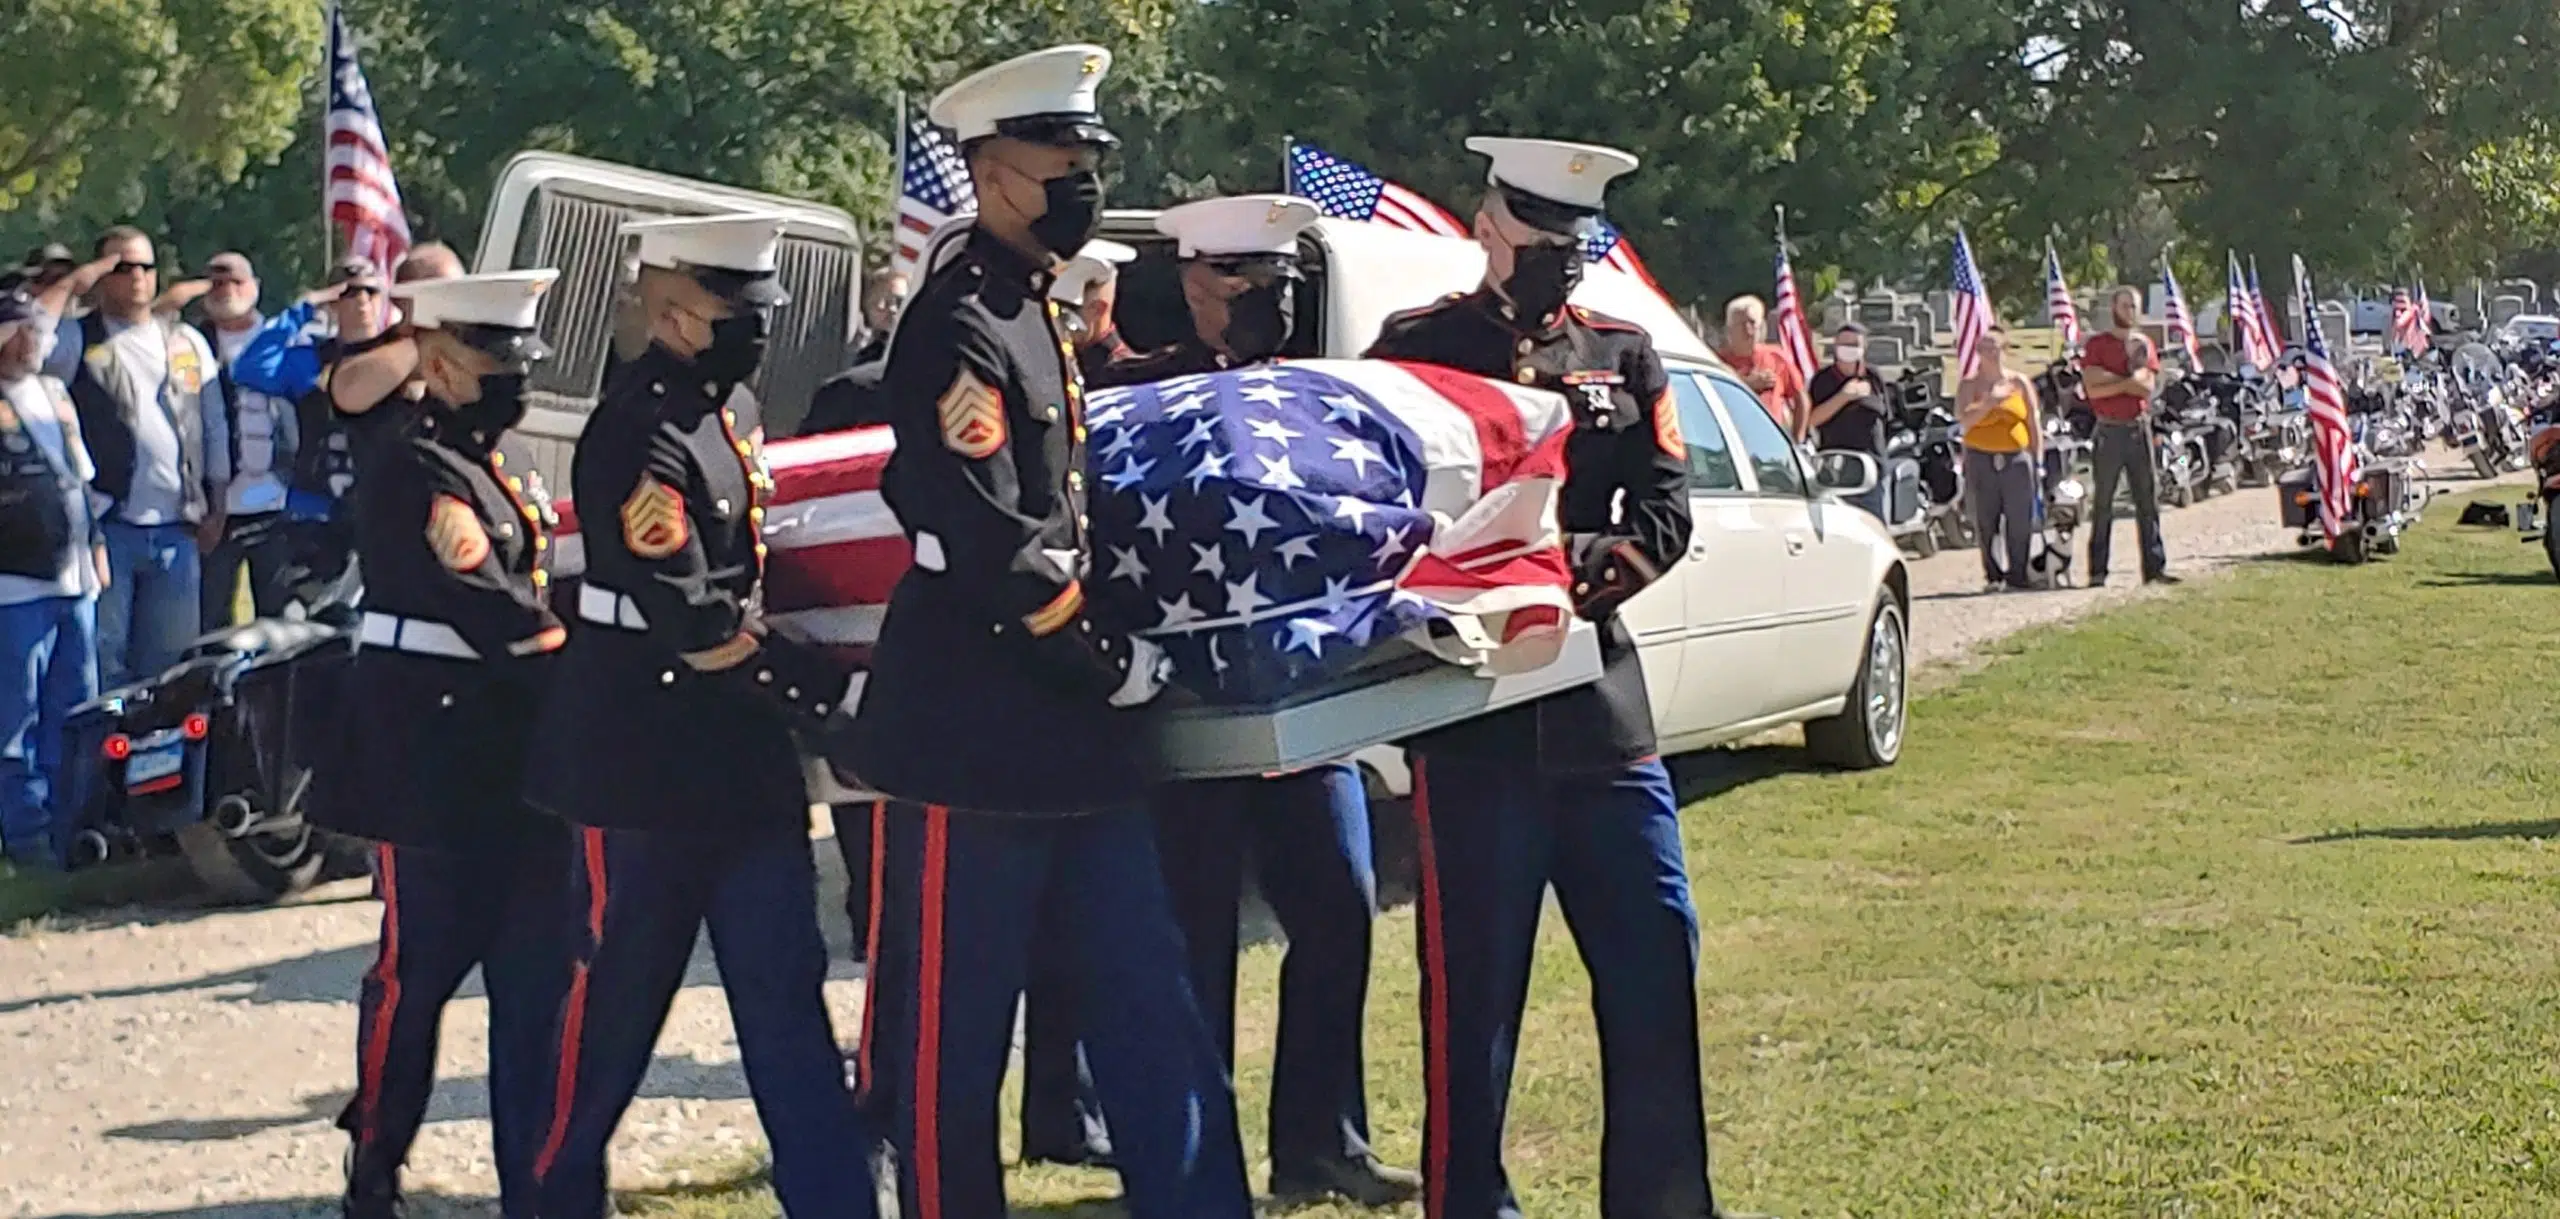 Friends, family and a thankful community attend burial of Marine Corps Private First Class Glenn White Saturday